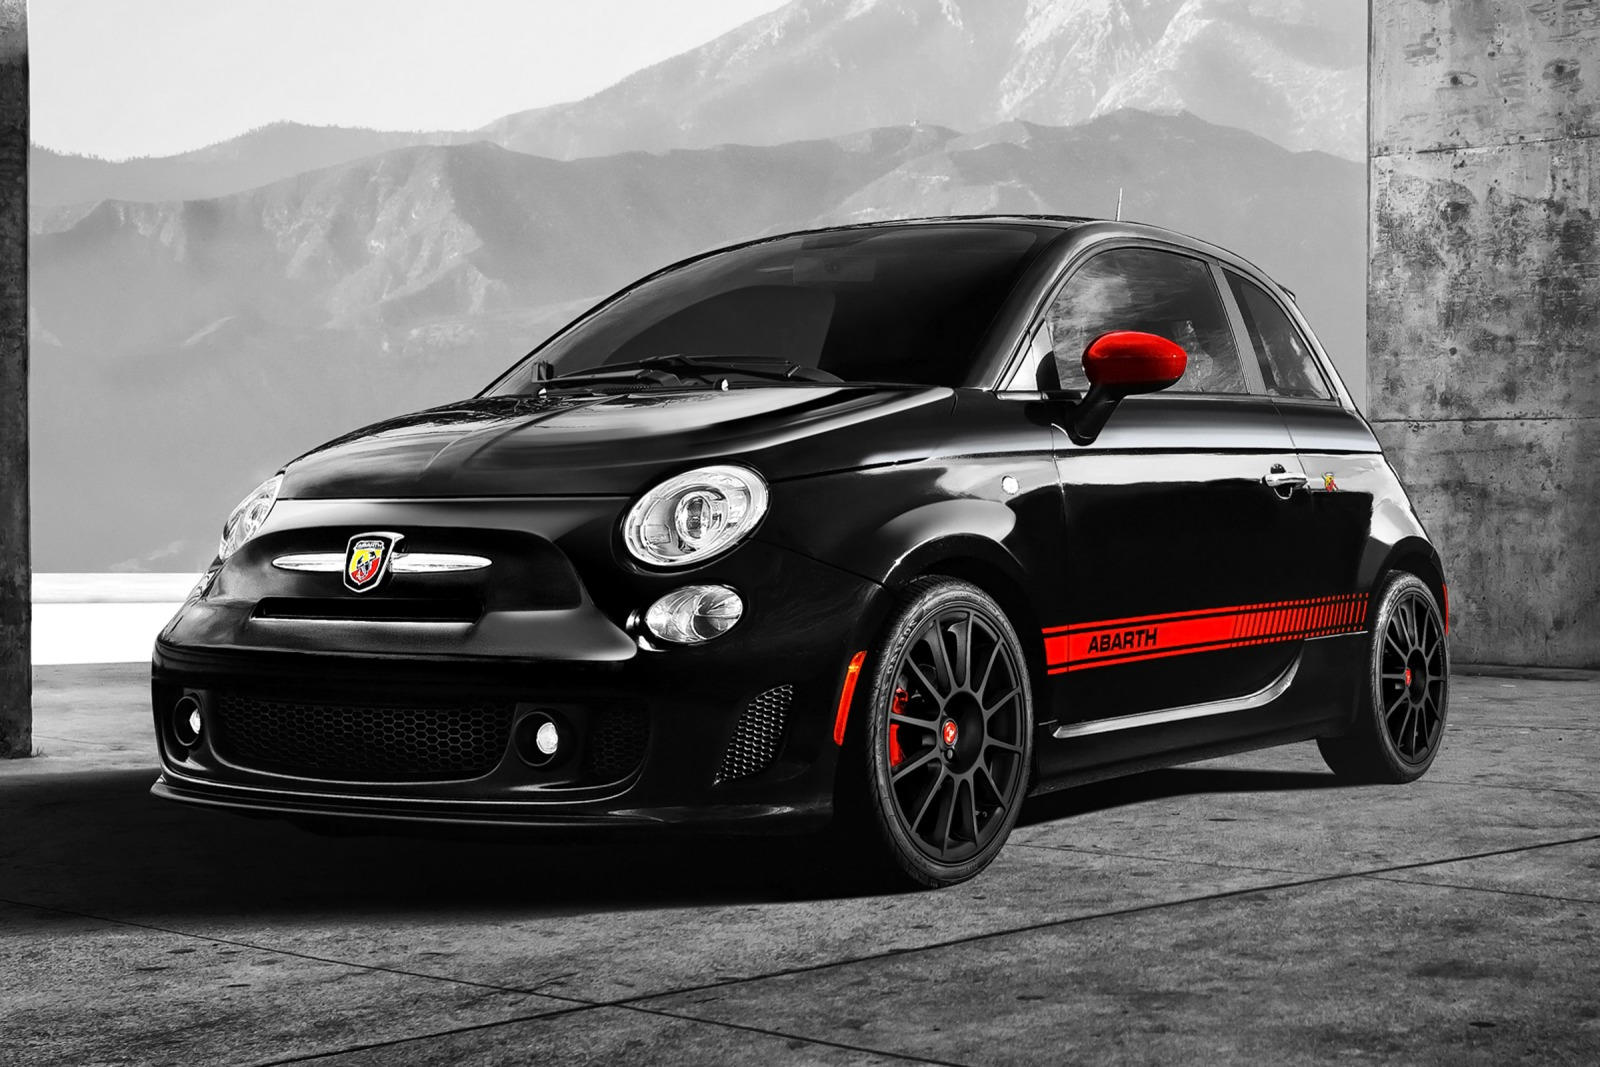 Fiat 500 2015 review